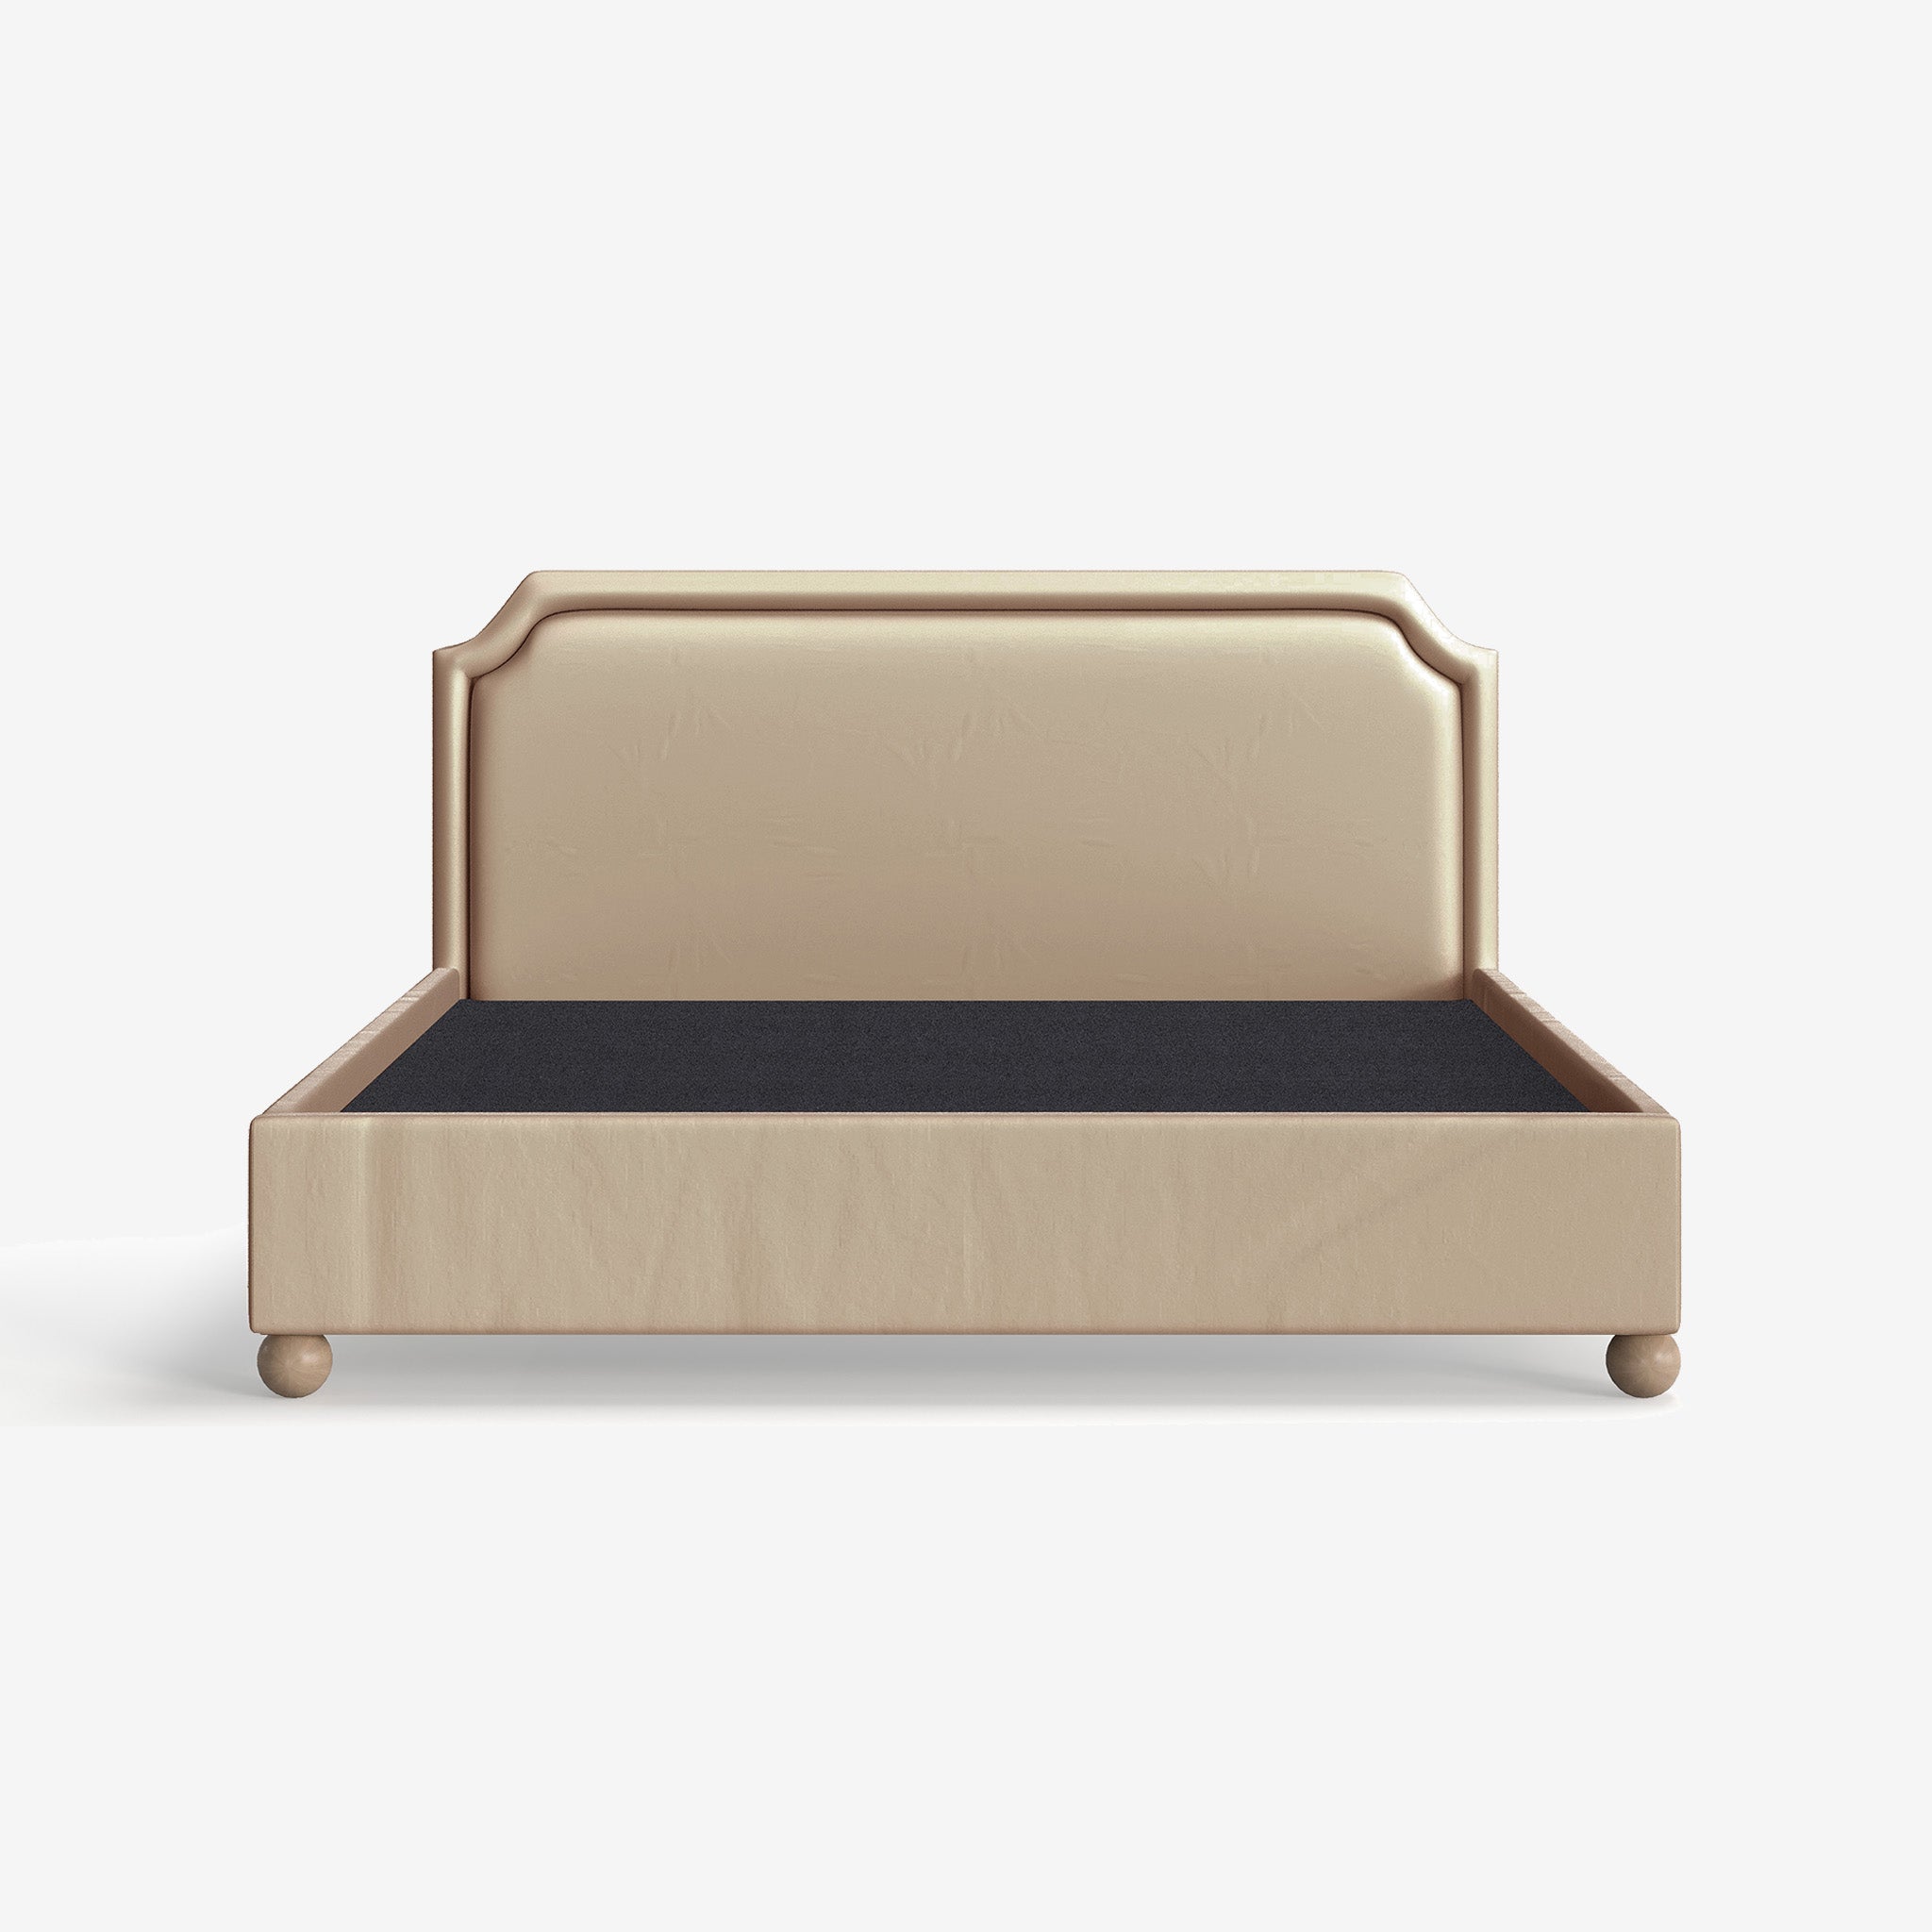 Haley Velvet Upholstered Bed with Fluted Edge Headbaord and end-lift Ottoman Storage, Contemporary Interiors, Online Shopping, Craftsmanship, Wooden feet, Bazaar